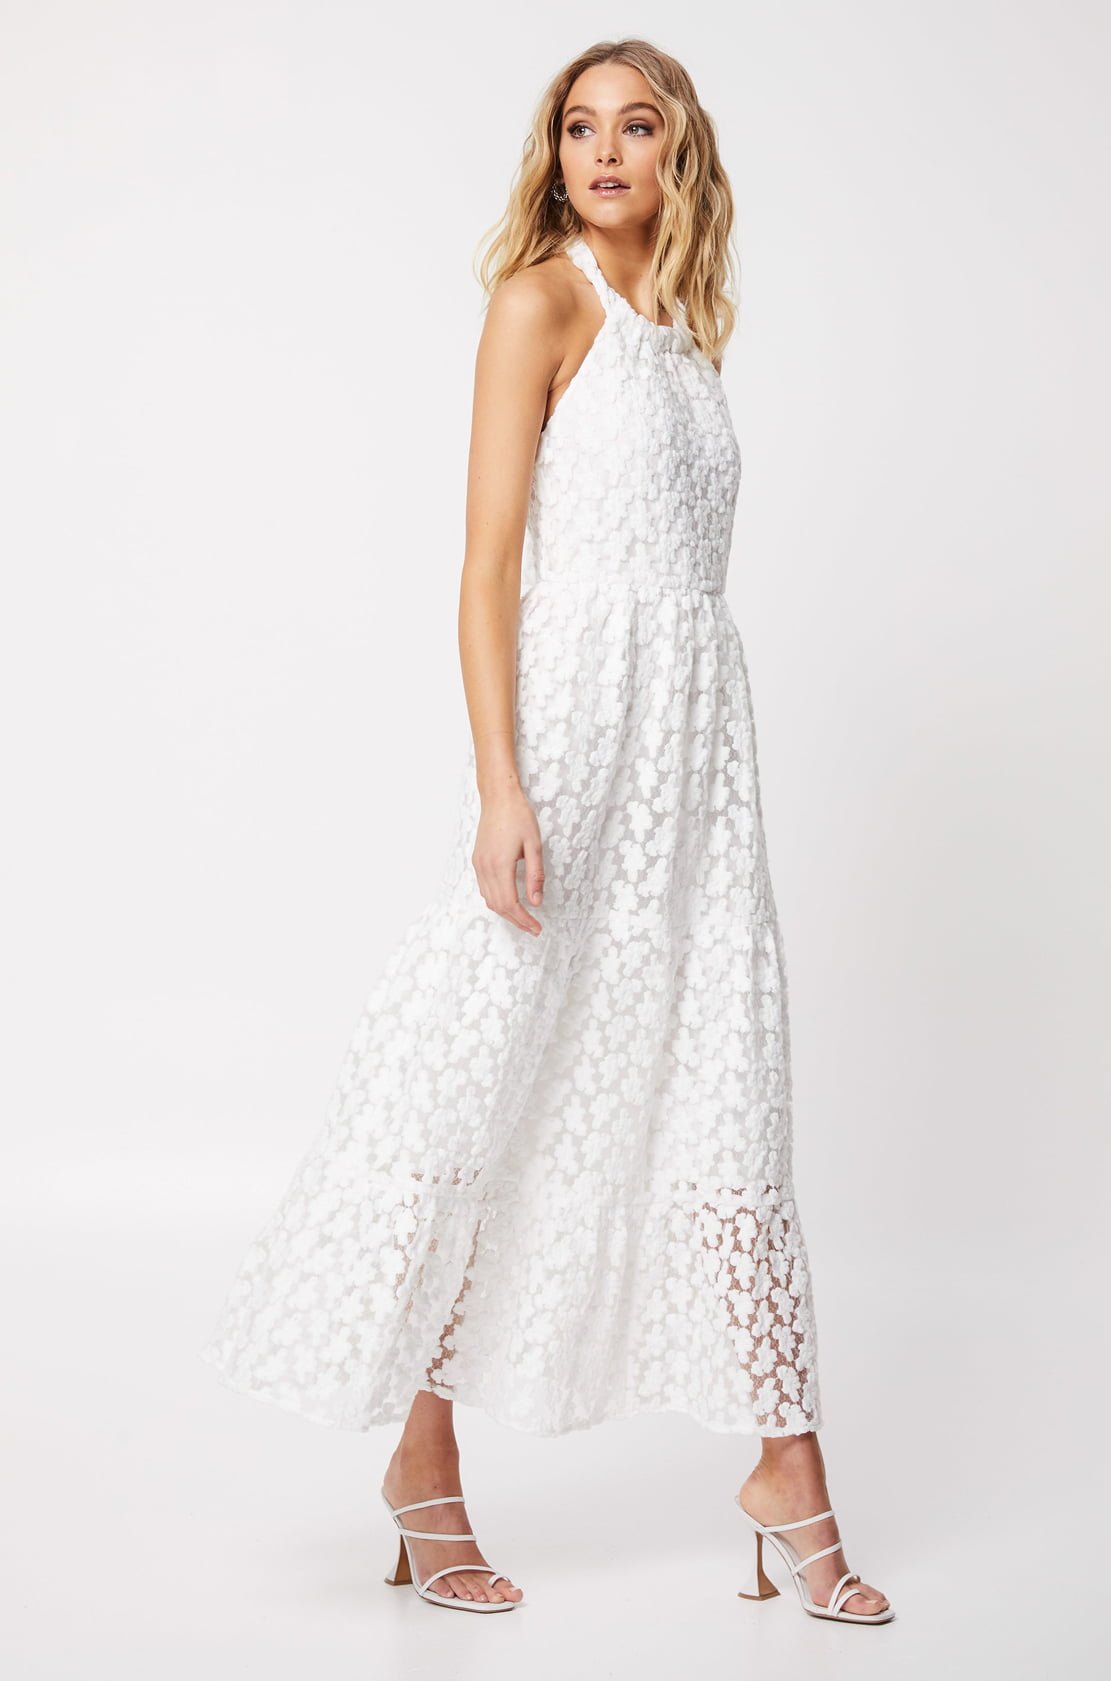 TOP 20 BRIDAL GOWNS UNDER $1000 – Hello May